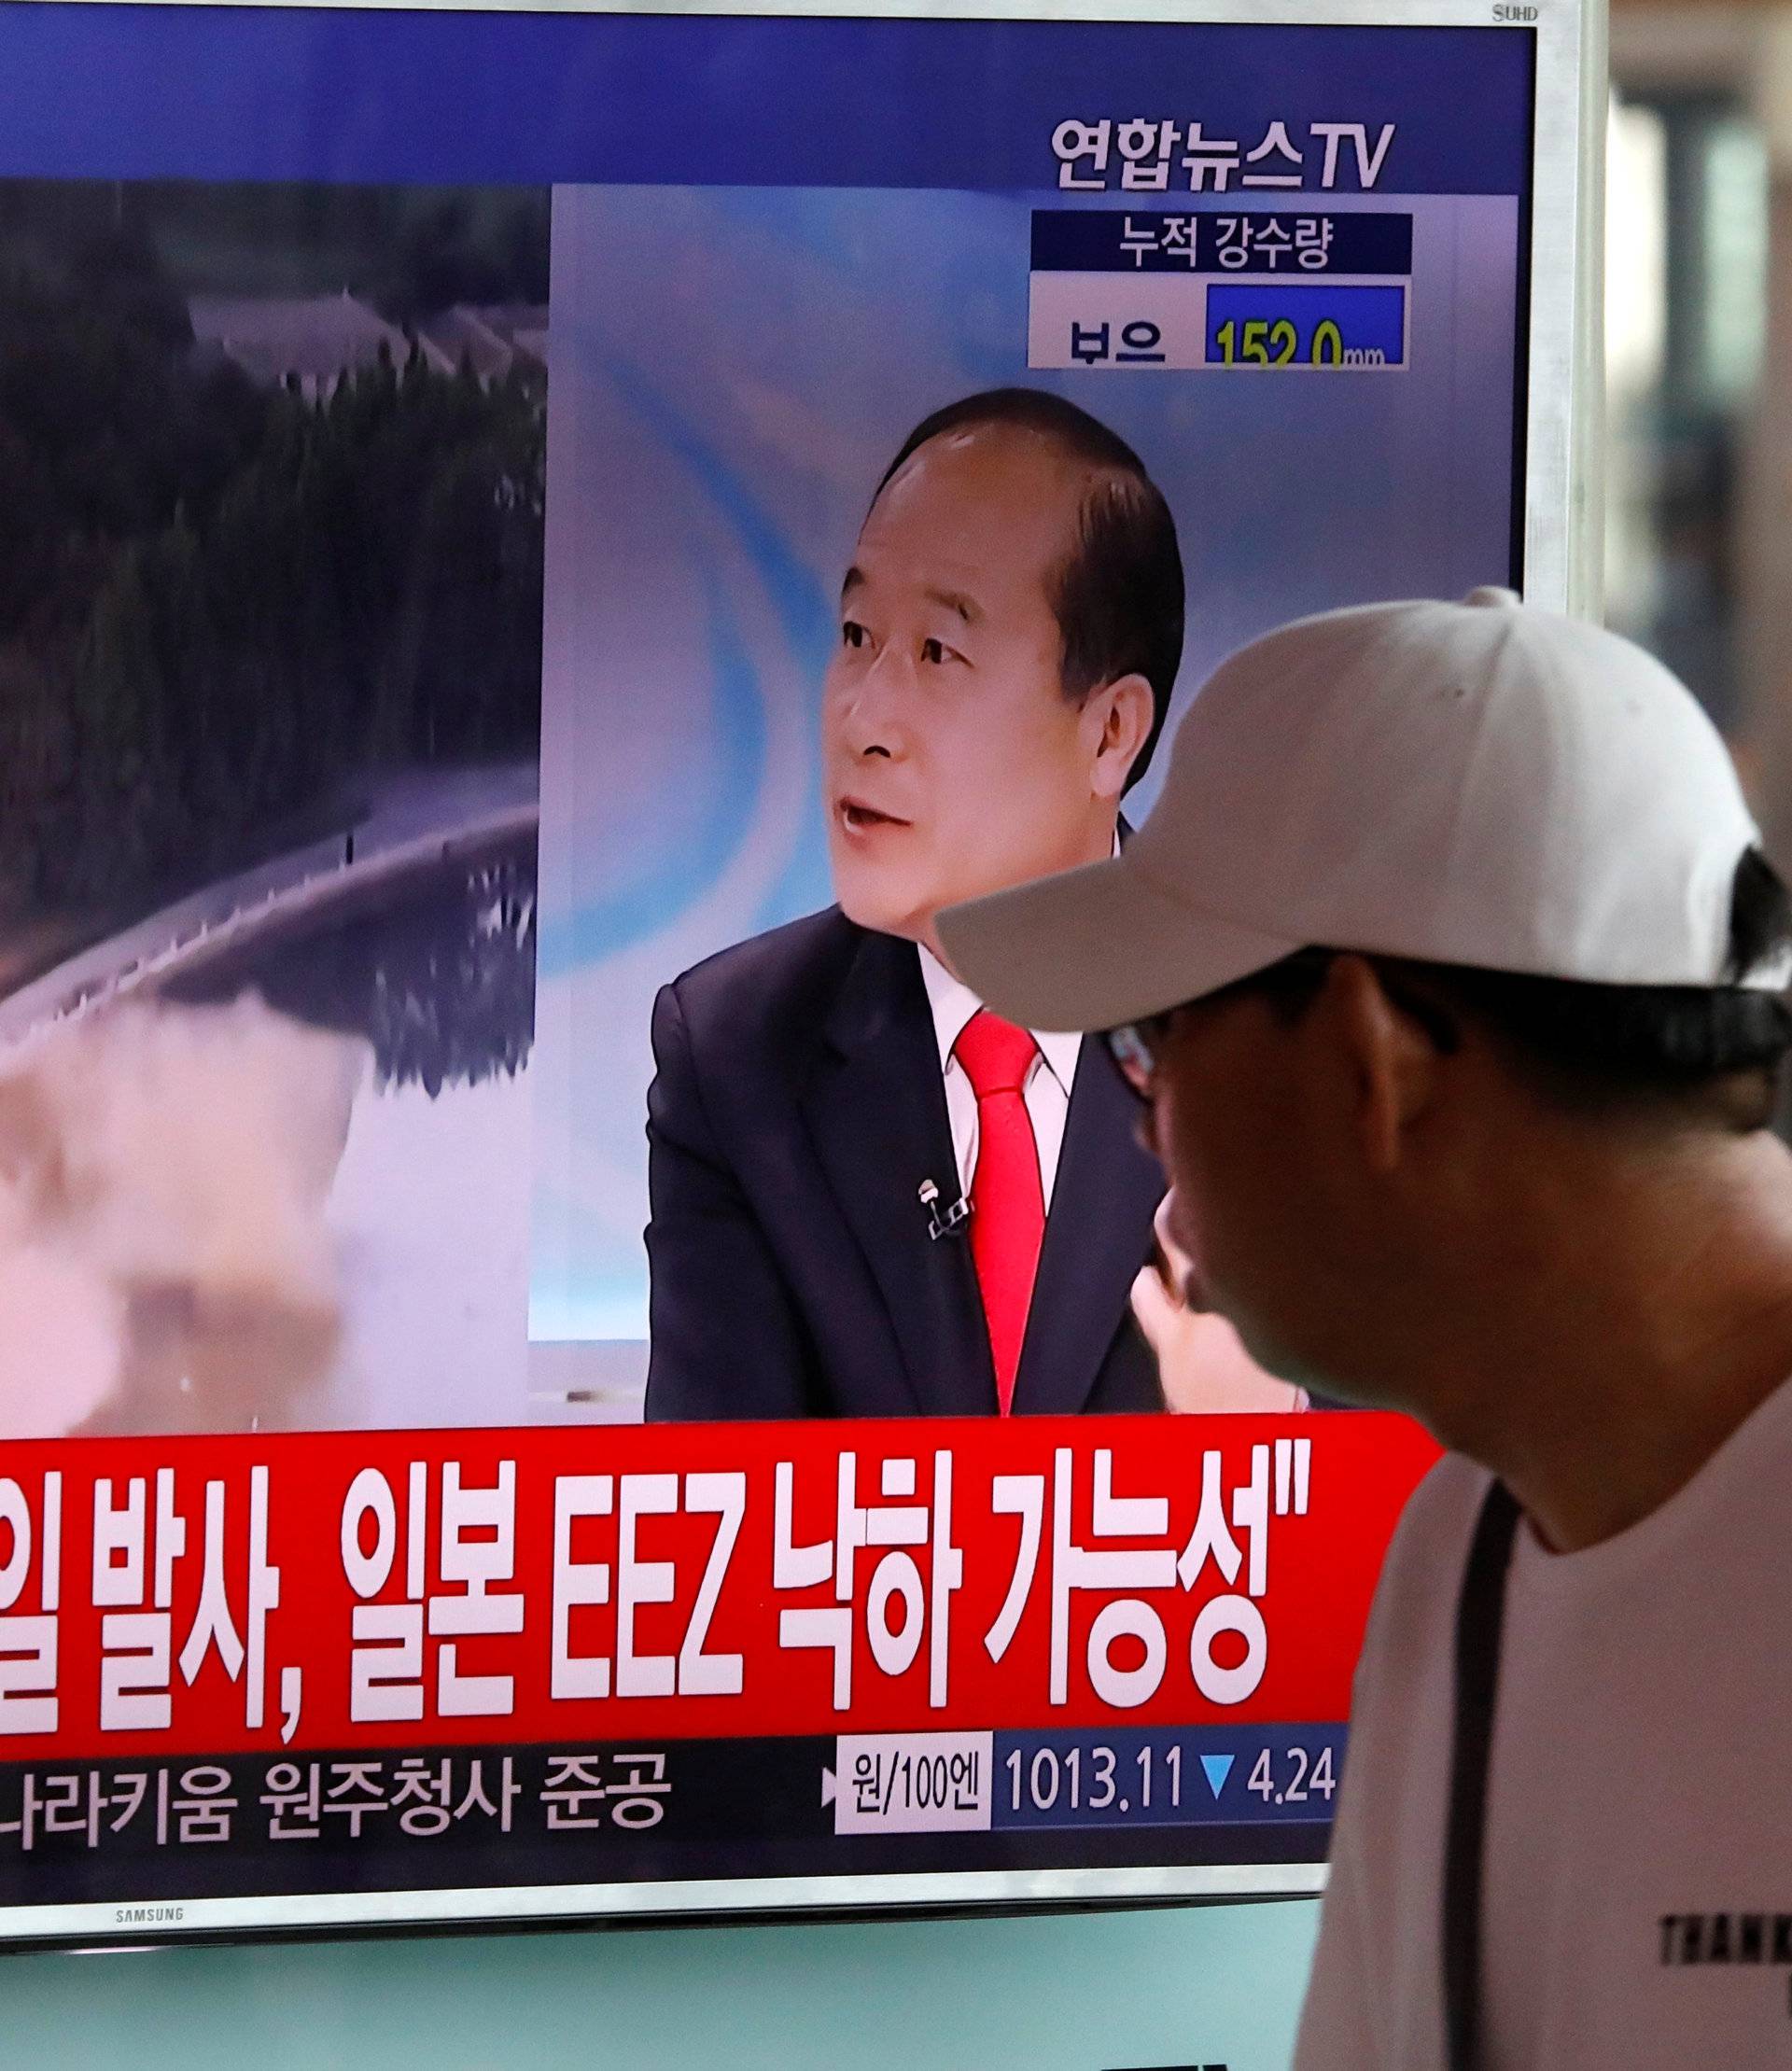 A man watches a TV broadcast of a news report on North Korea's ballistic missile test, at a railway station in Seoul